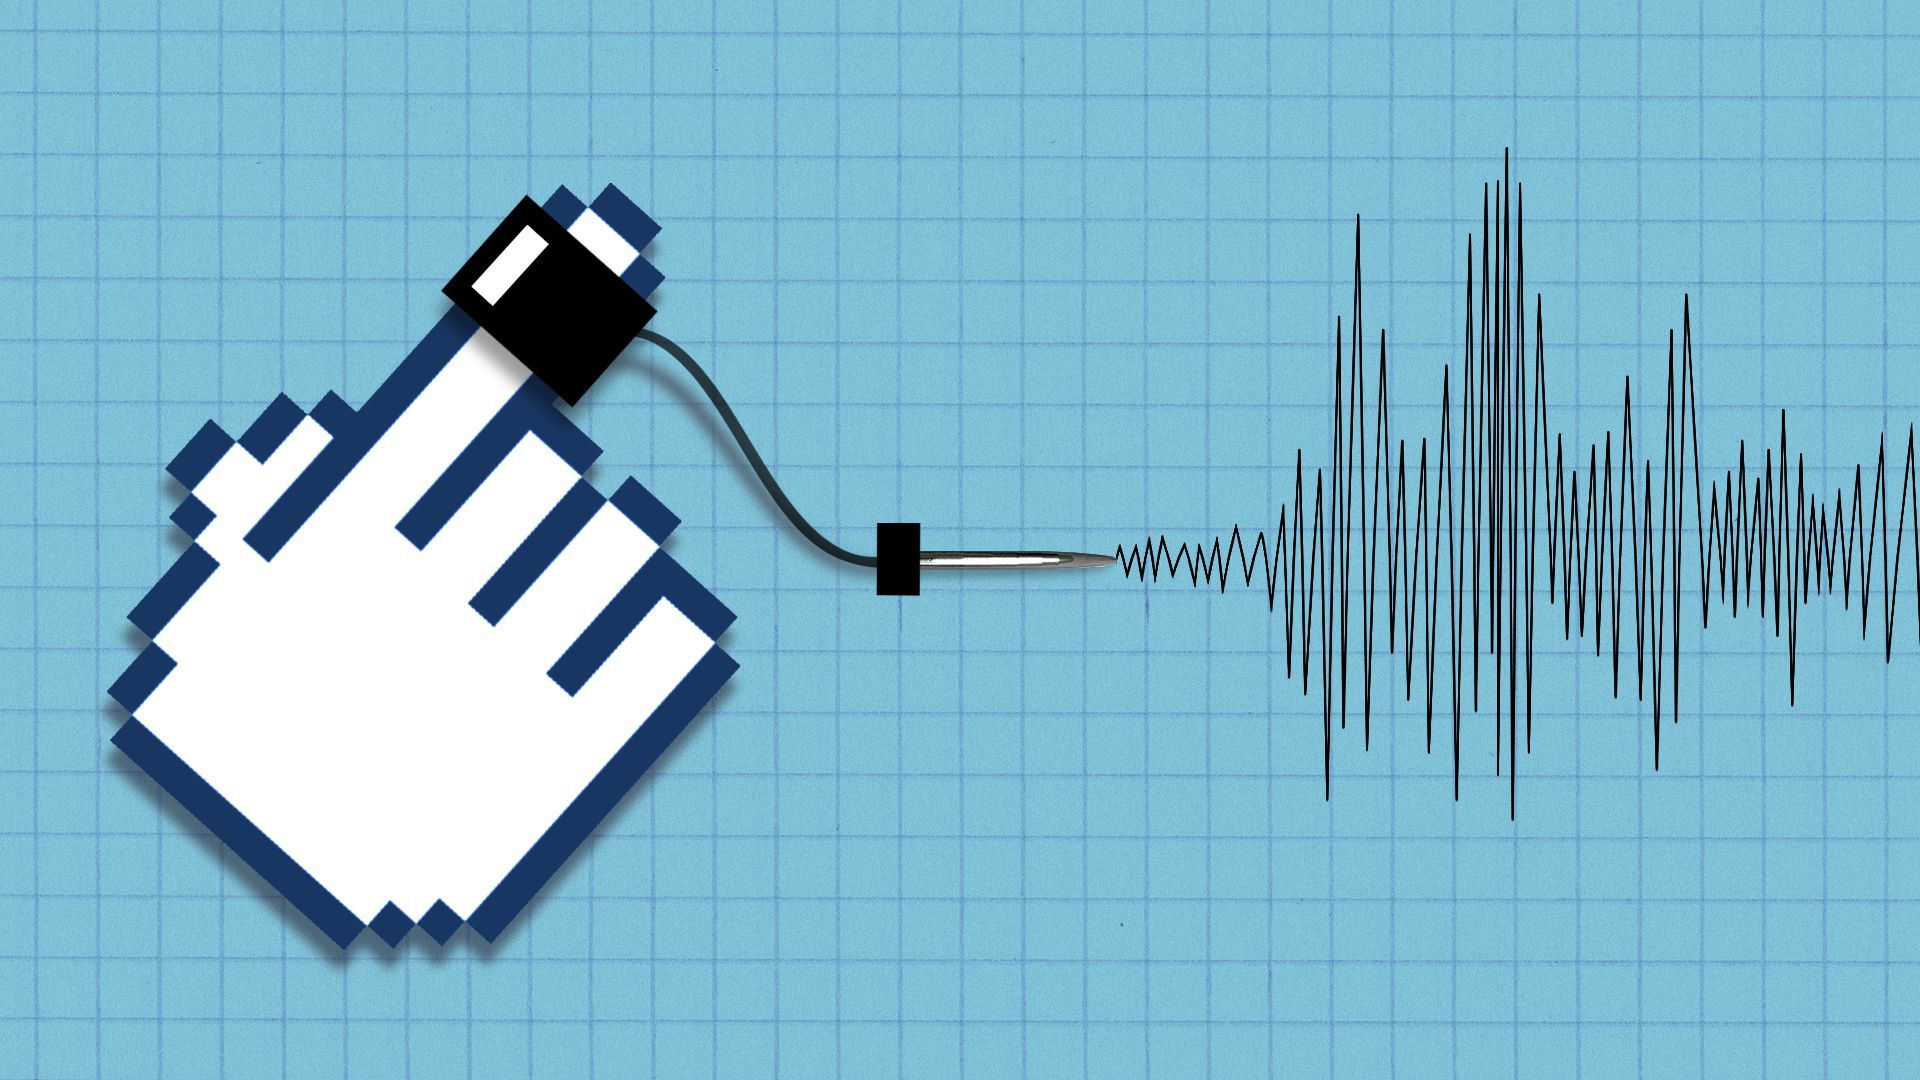 Illustration of a hand cursor connected to a lie detector test